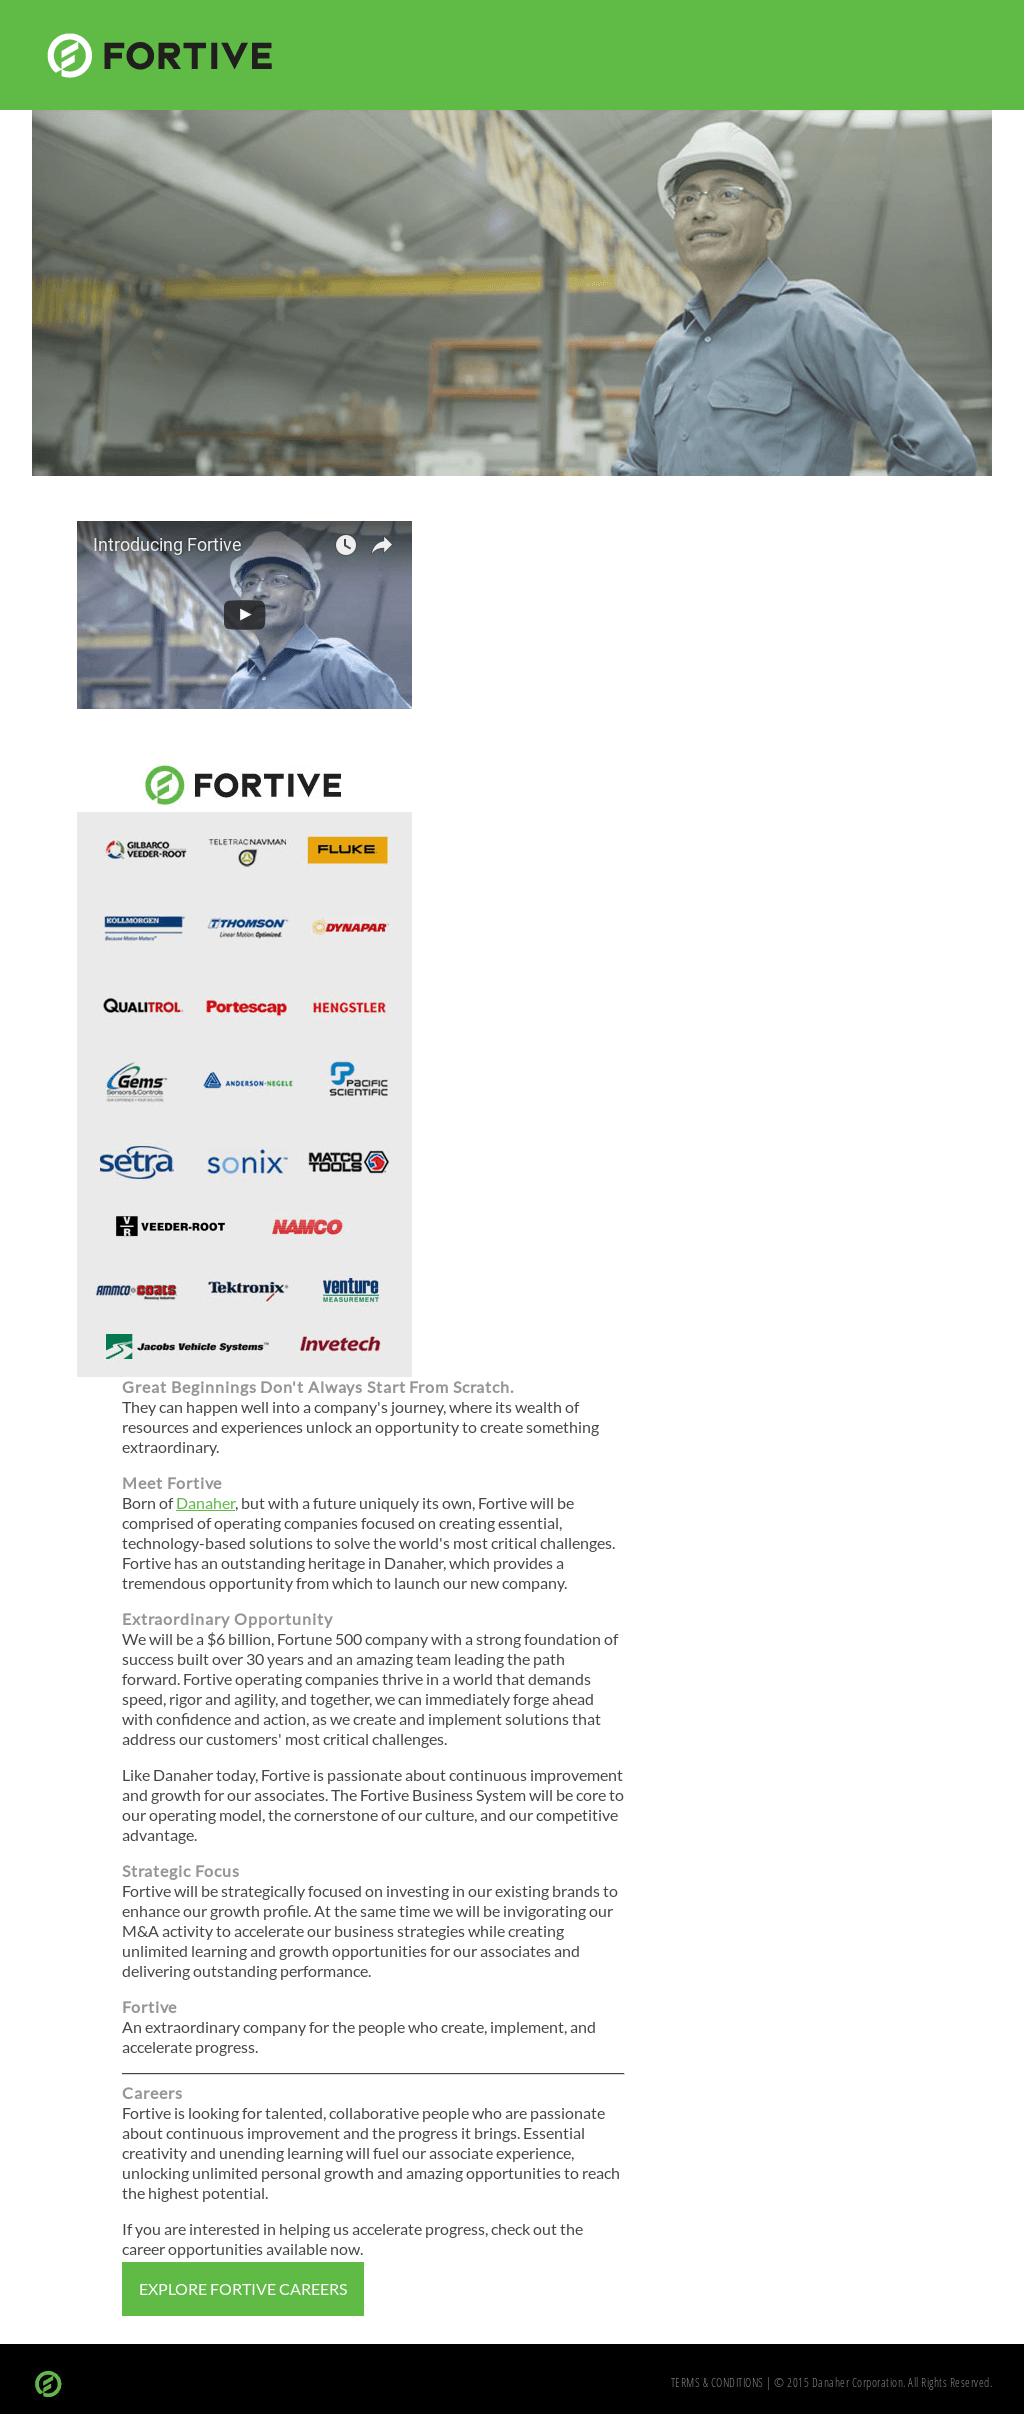 Fortive Logo - Fortive Competitors, Revenue and Employees Company Profile